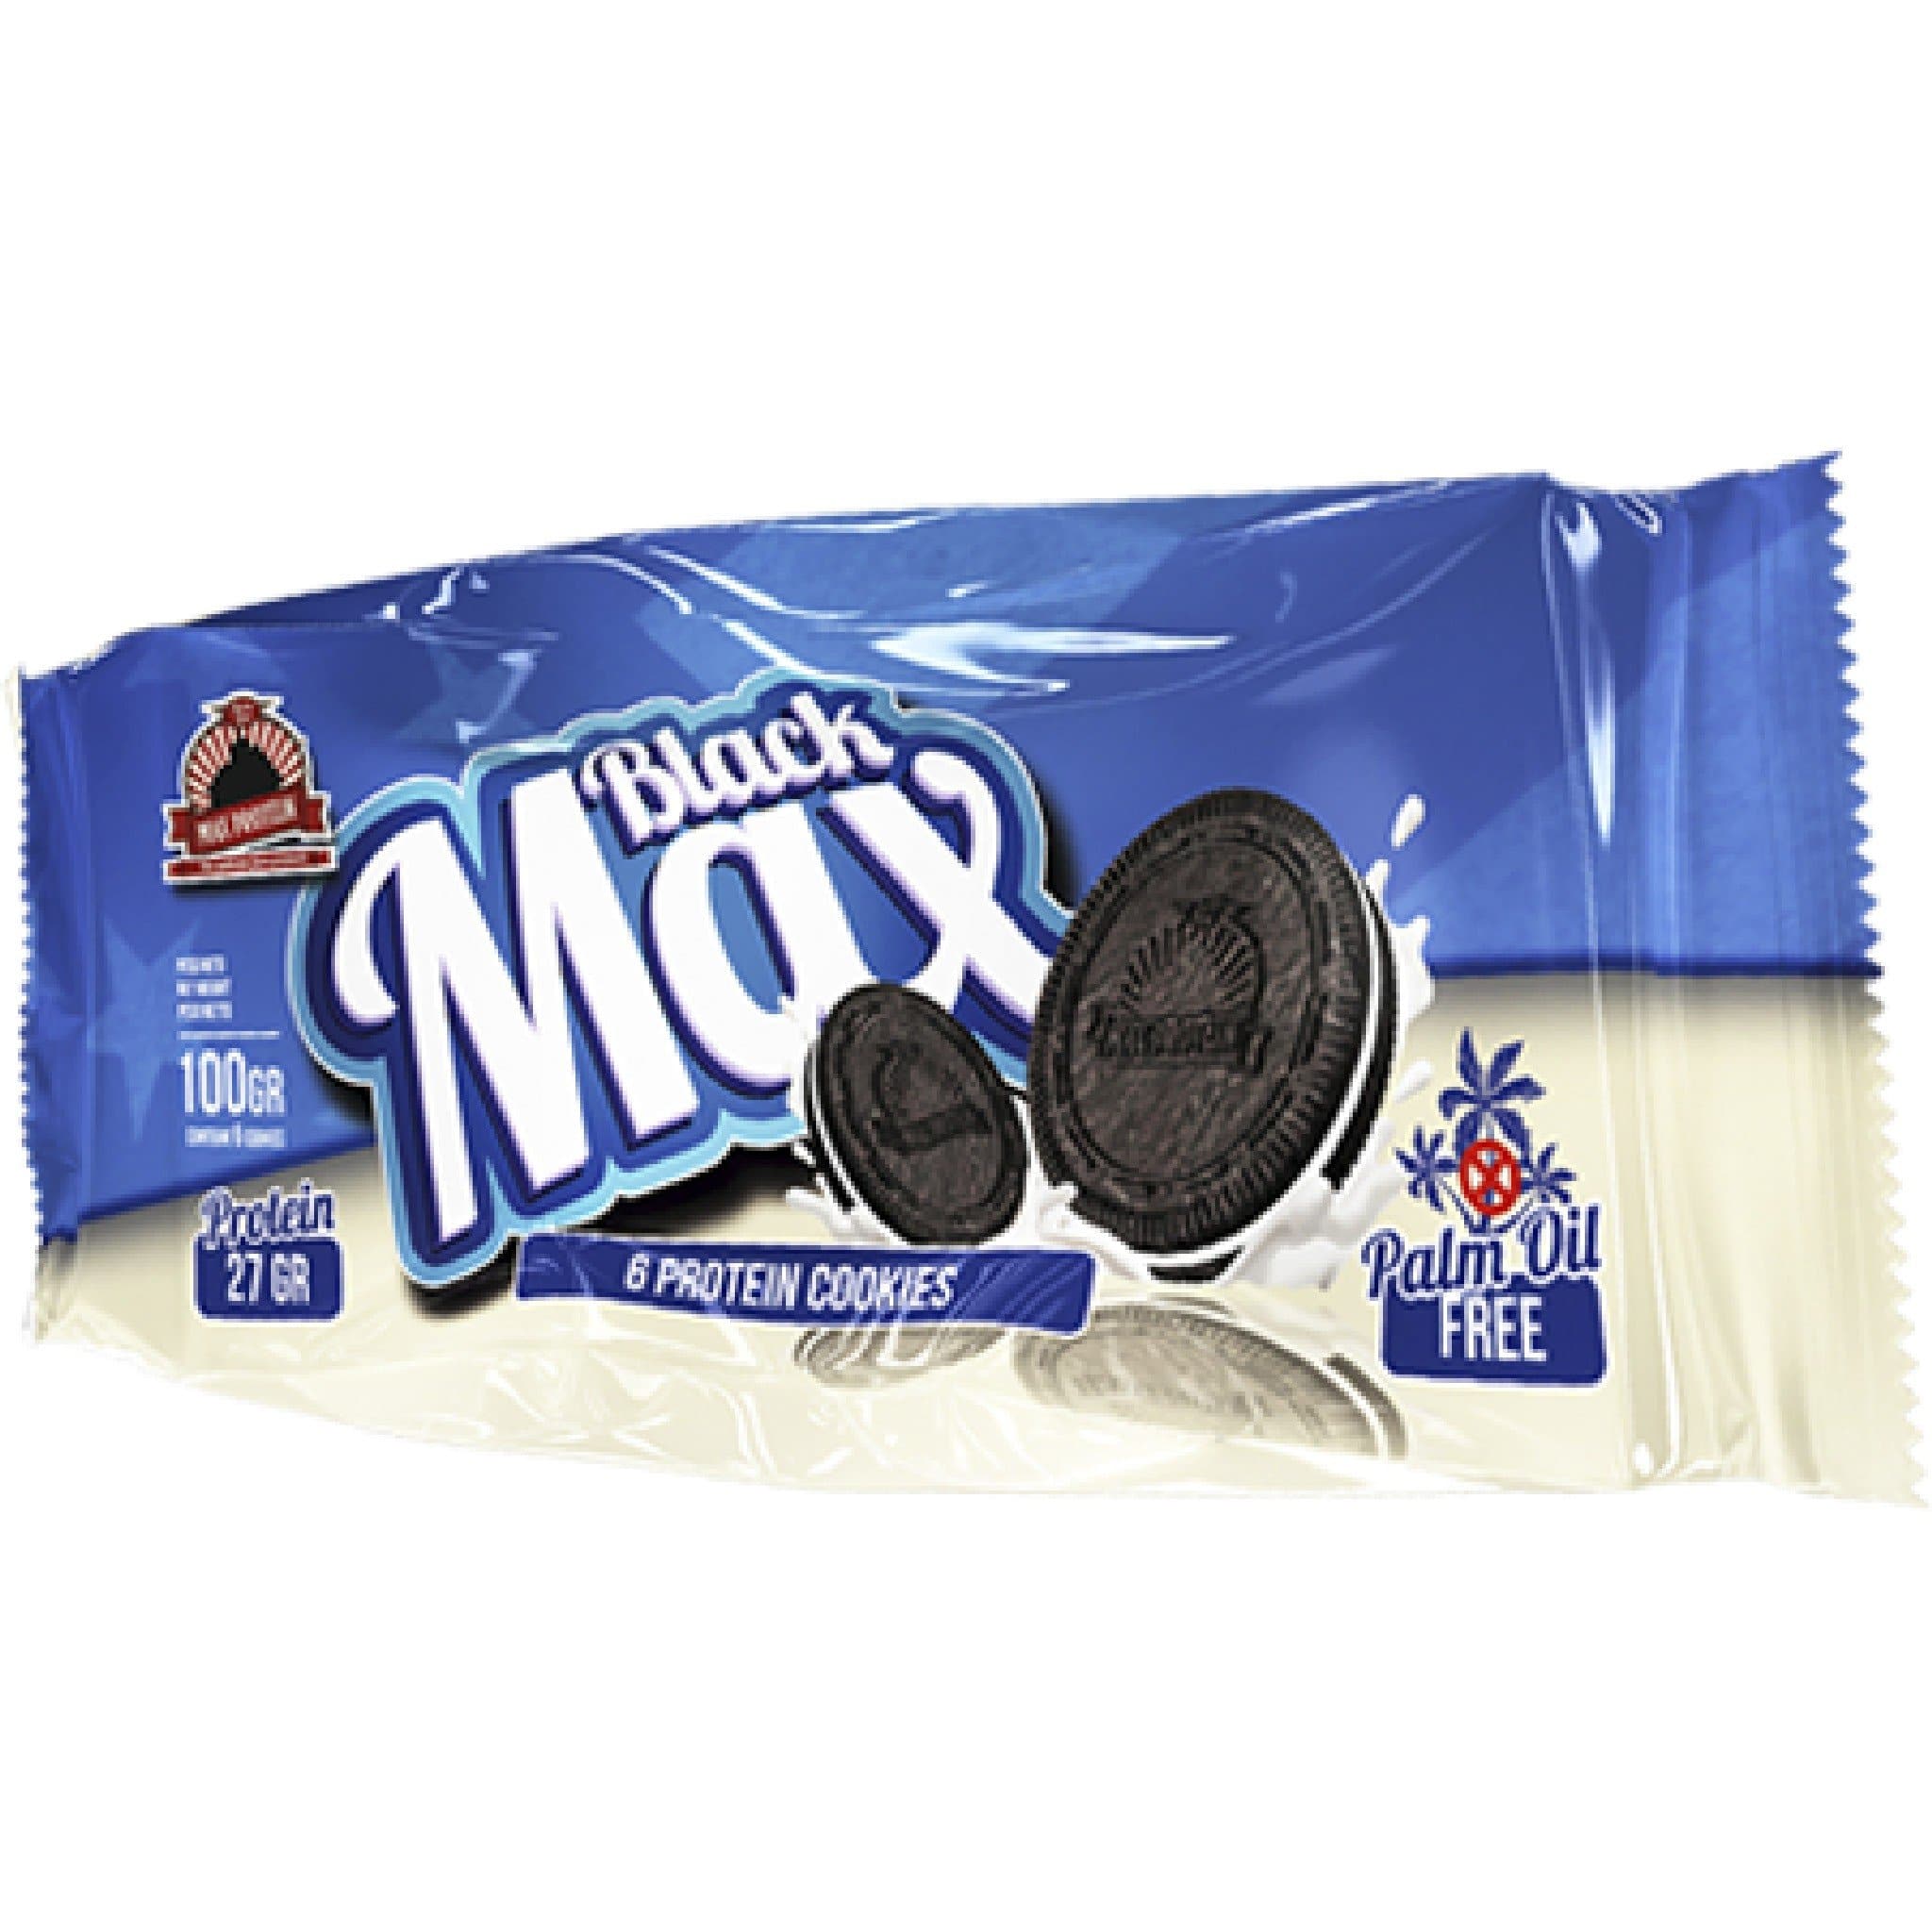 Black Max Protein Cookie 100g | HERC'S Nutrition Canada